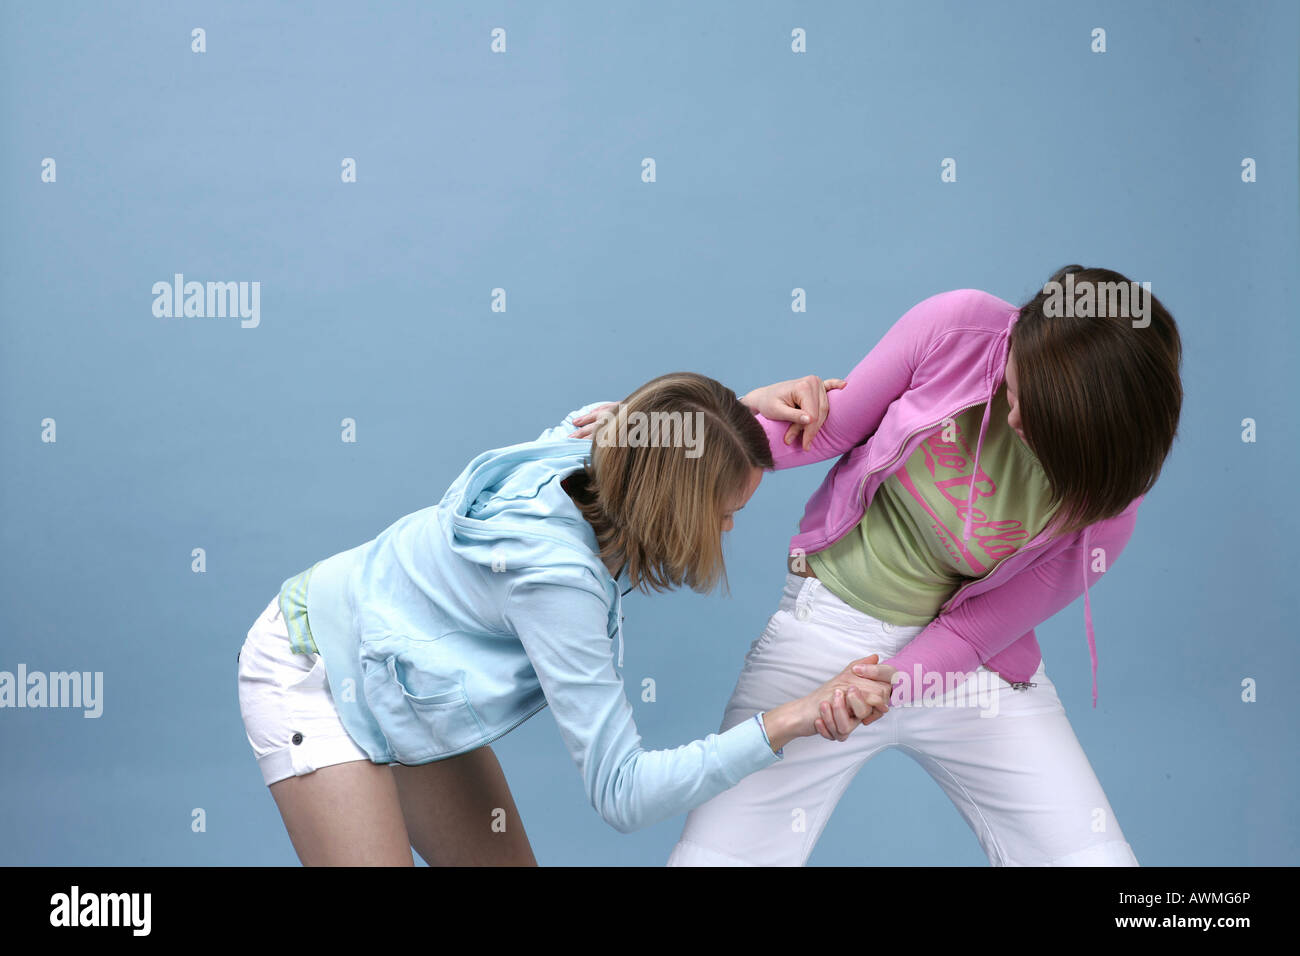 Two girls wearing casual outfits romping around in front of a light blue backdrop Stock Photo